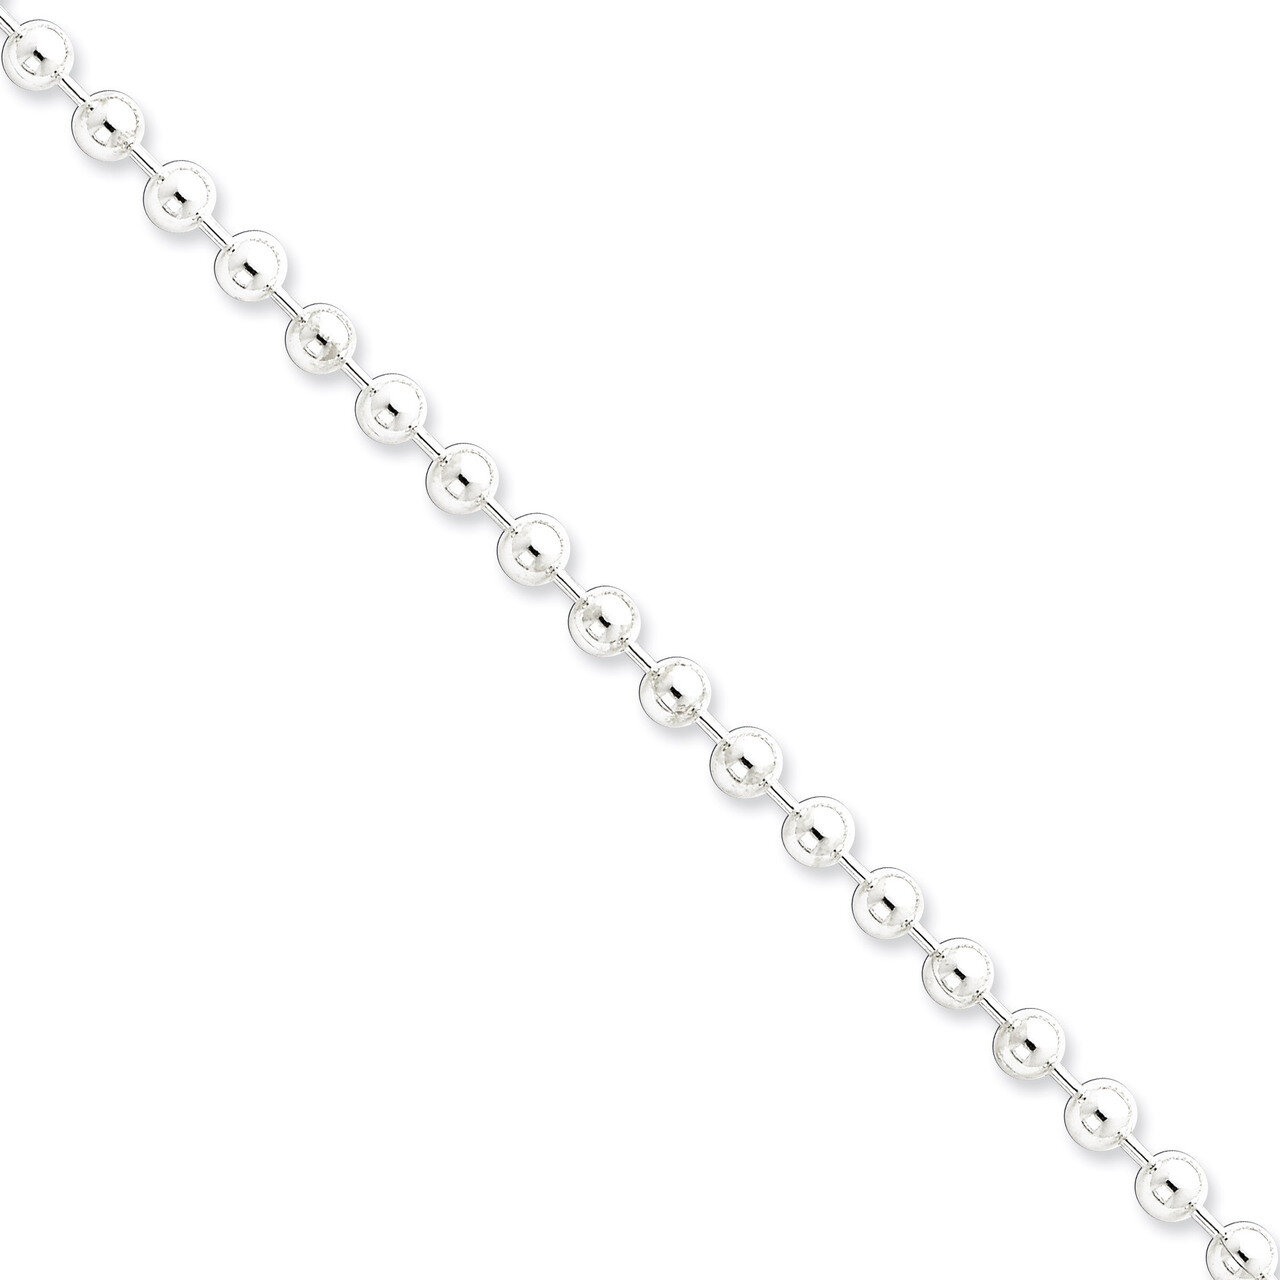 20 Inch 5.00mm Beaded Chain Sterling Silver QK84-20